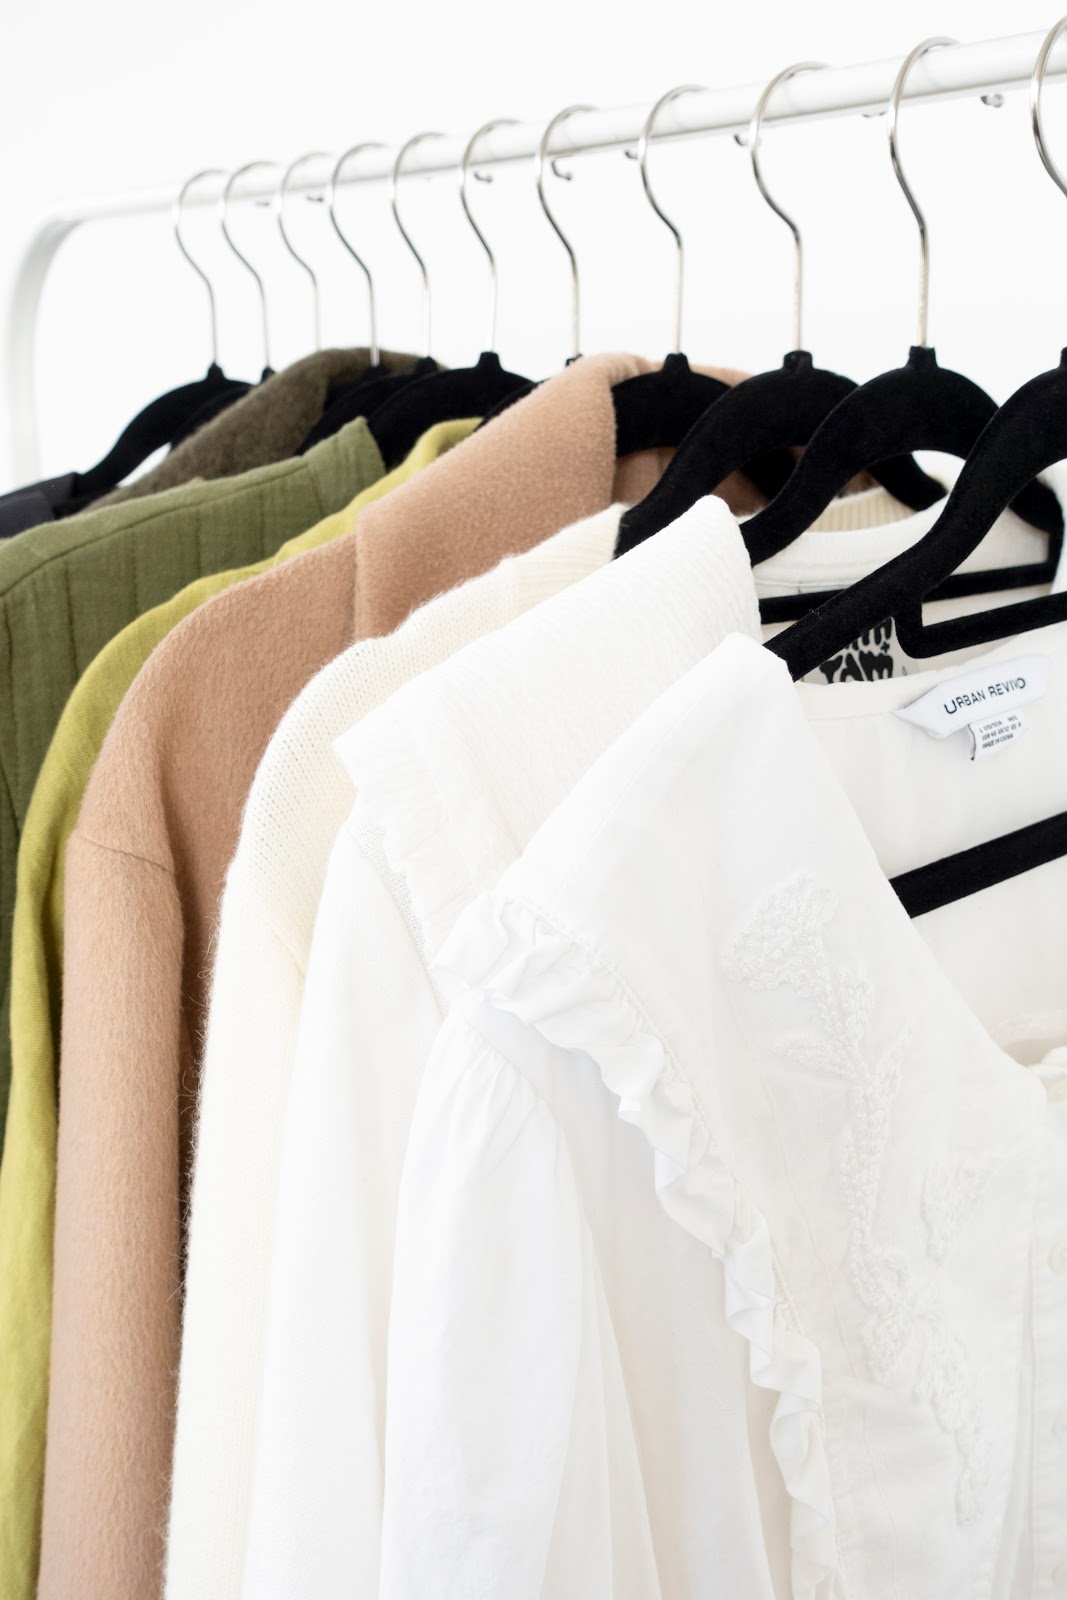 How to Create a Wardrobe Colour Palette